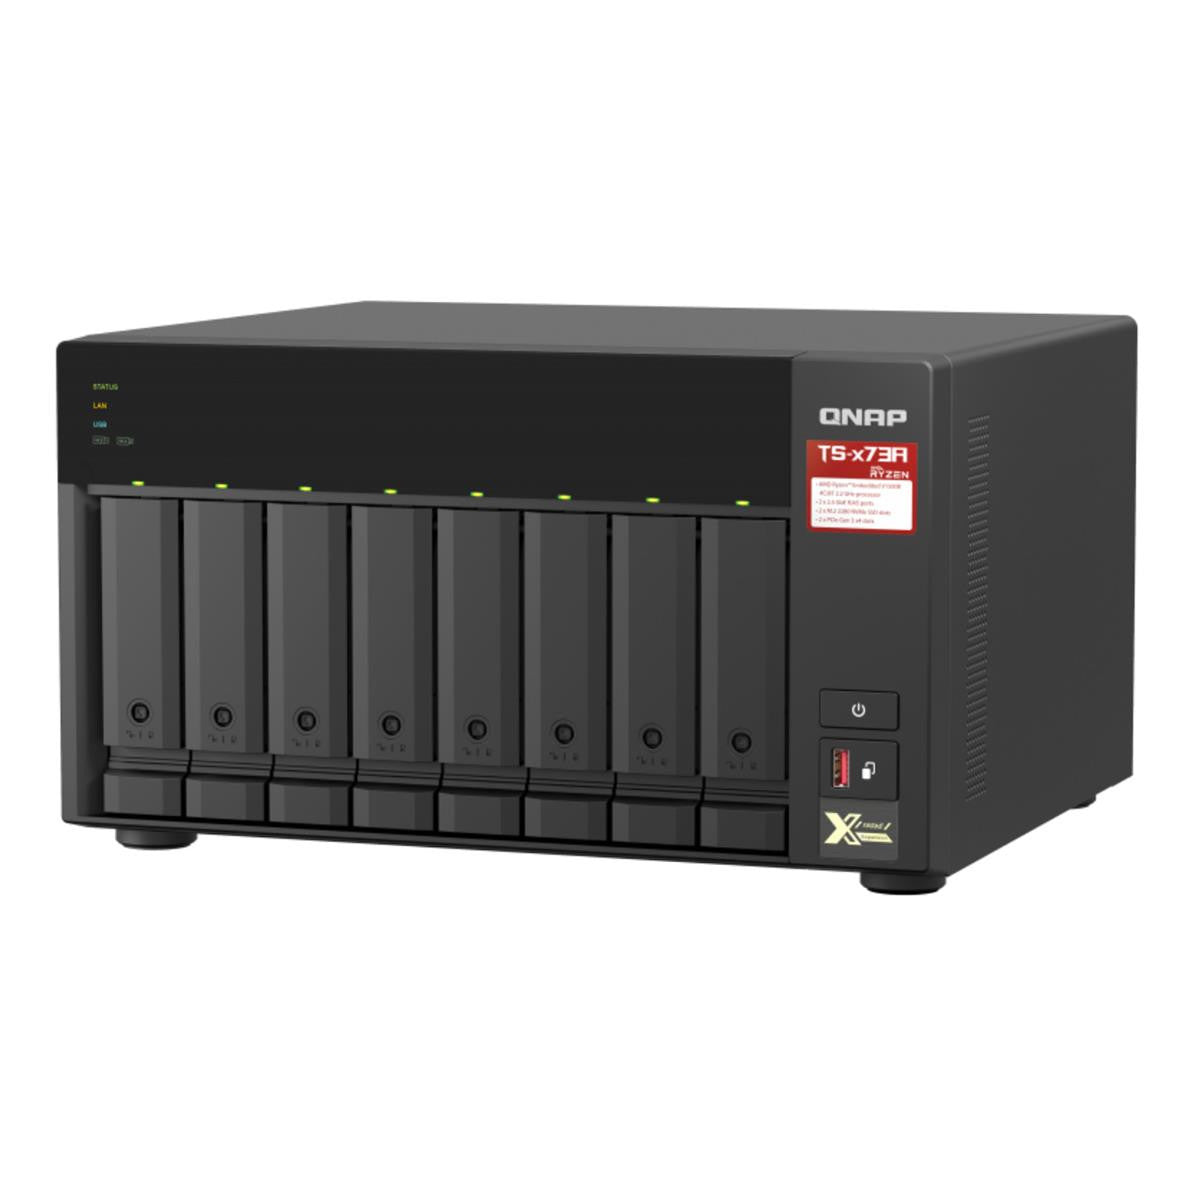 QNAP TS-873A 8-BAY NAS with 16GB DDR4 RAM and 24TB (8x3TB) Seagate Ironwolf NAS Drives Fully Assembled and Tested